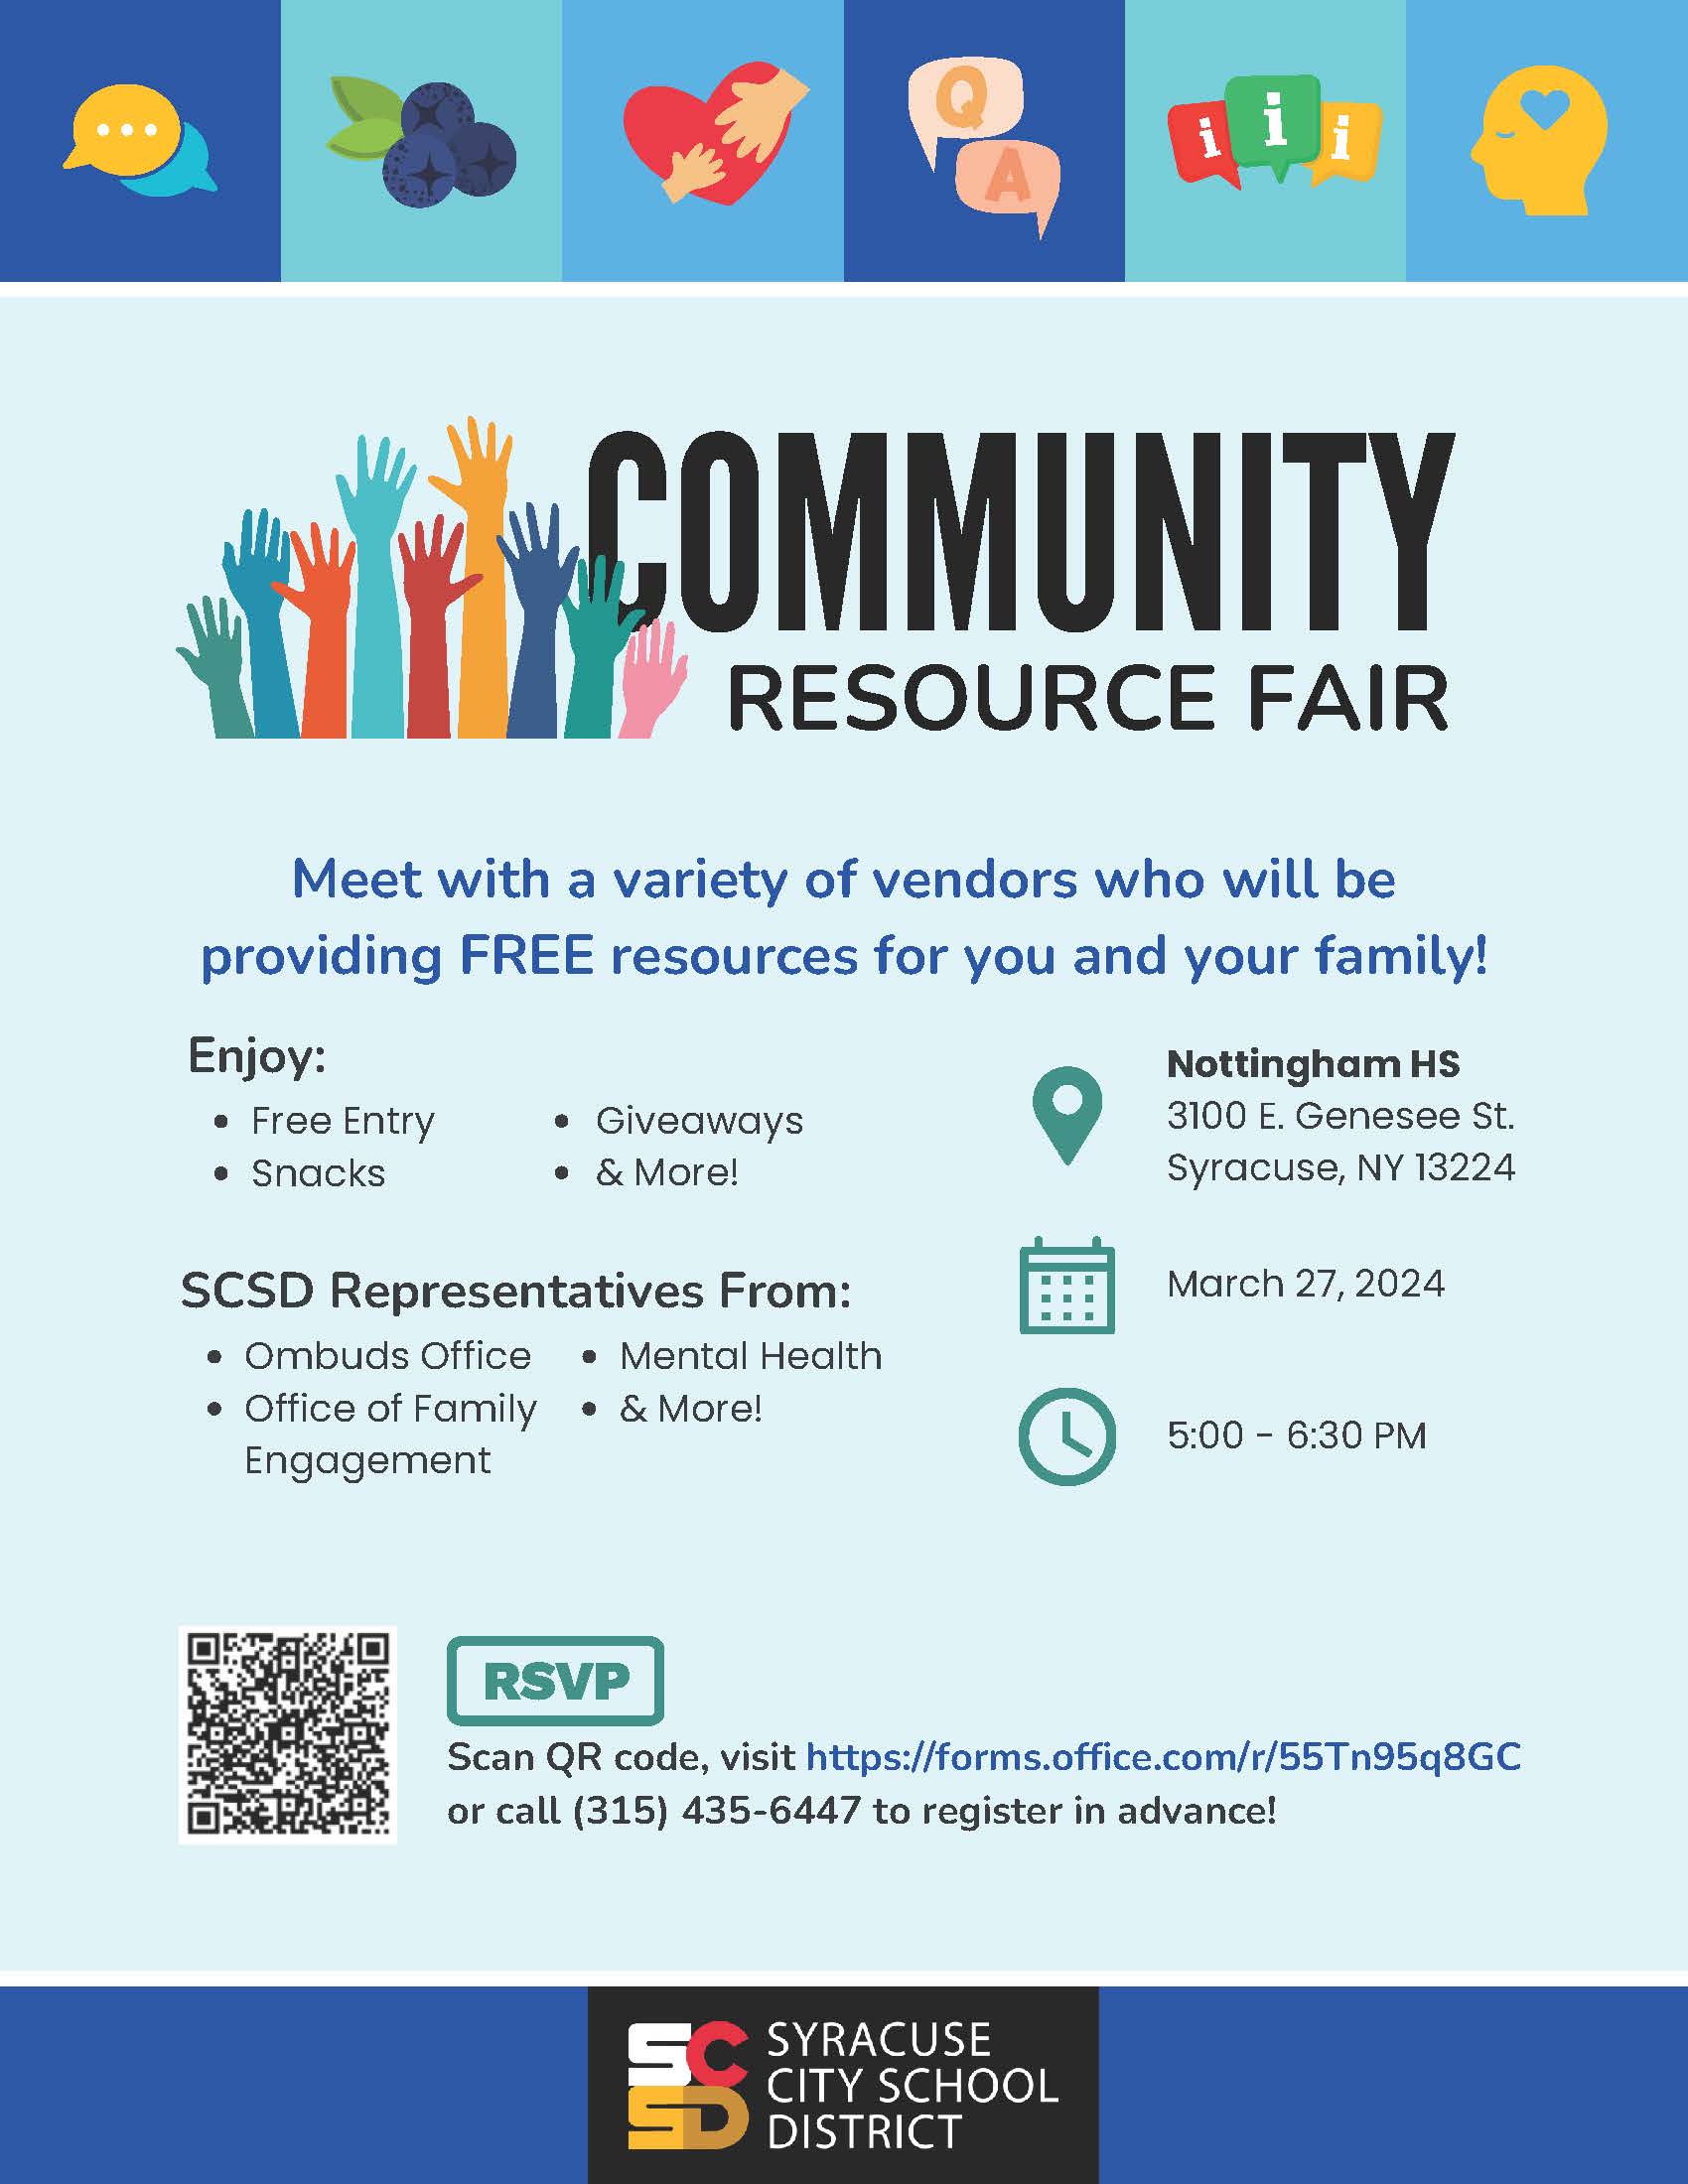 This is the photo of a flyer for the Community Resource Fair on March 27th. Details from the flyer are provided in the text for this page.